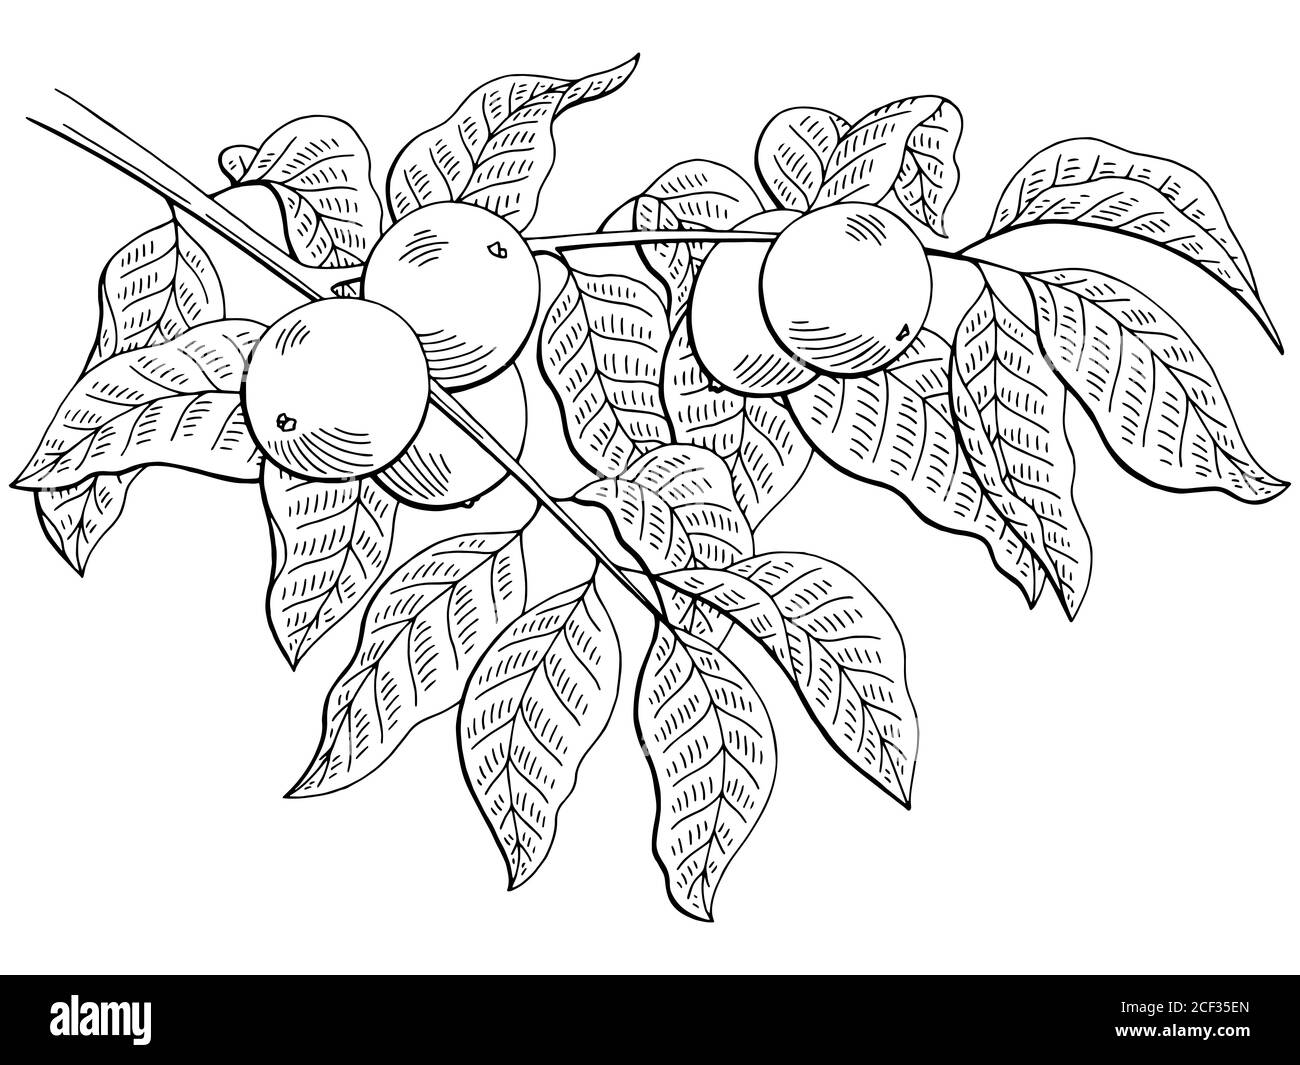 Walnut graphic branch black white isolated sketch illustration vector Stock Vector